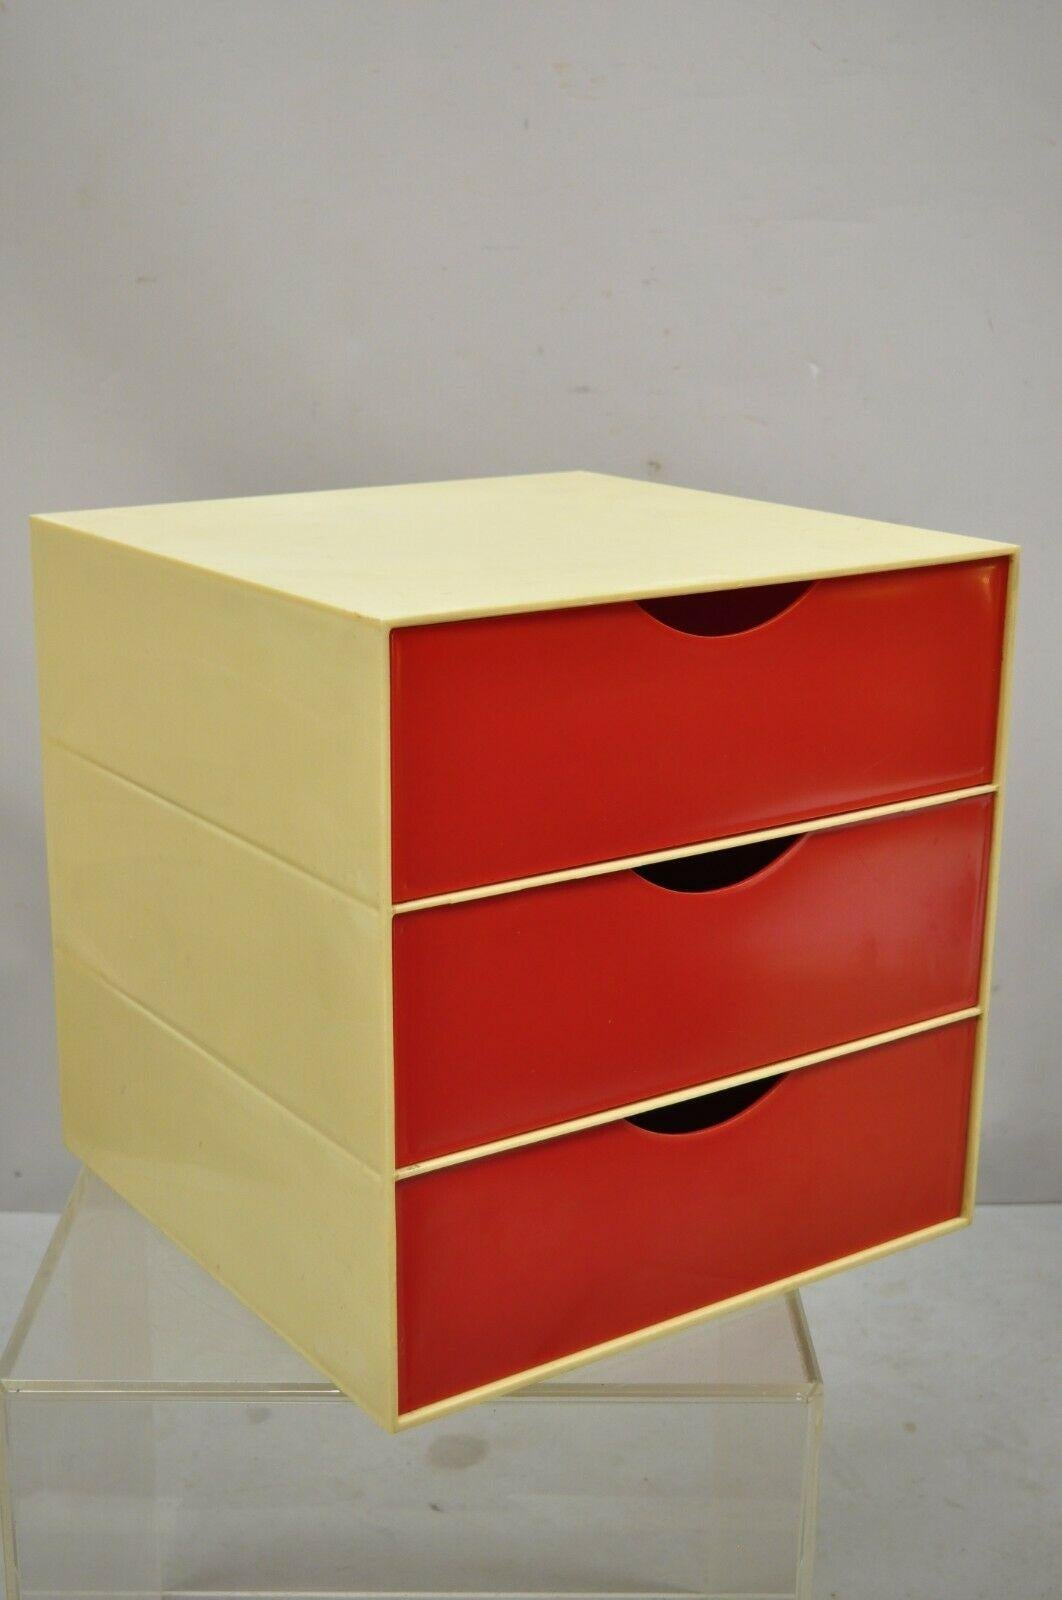 Vintage Joe Colombo Palaset style plastic red 3 drawer cube (A). Item features 3 sliding drawers, molded plastic construction, unmarked, in the style of Joe Colombo, very nice vintage item, clean modernist lines. Listing is for one piece. Second